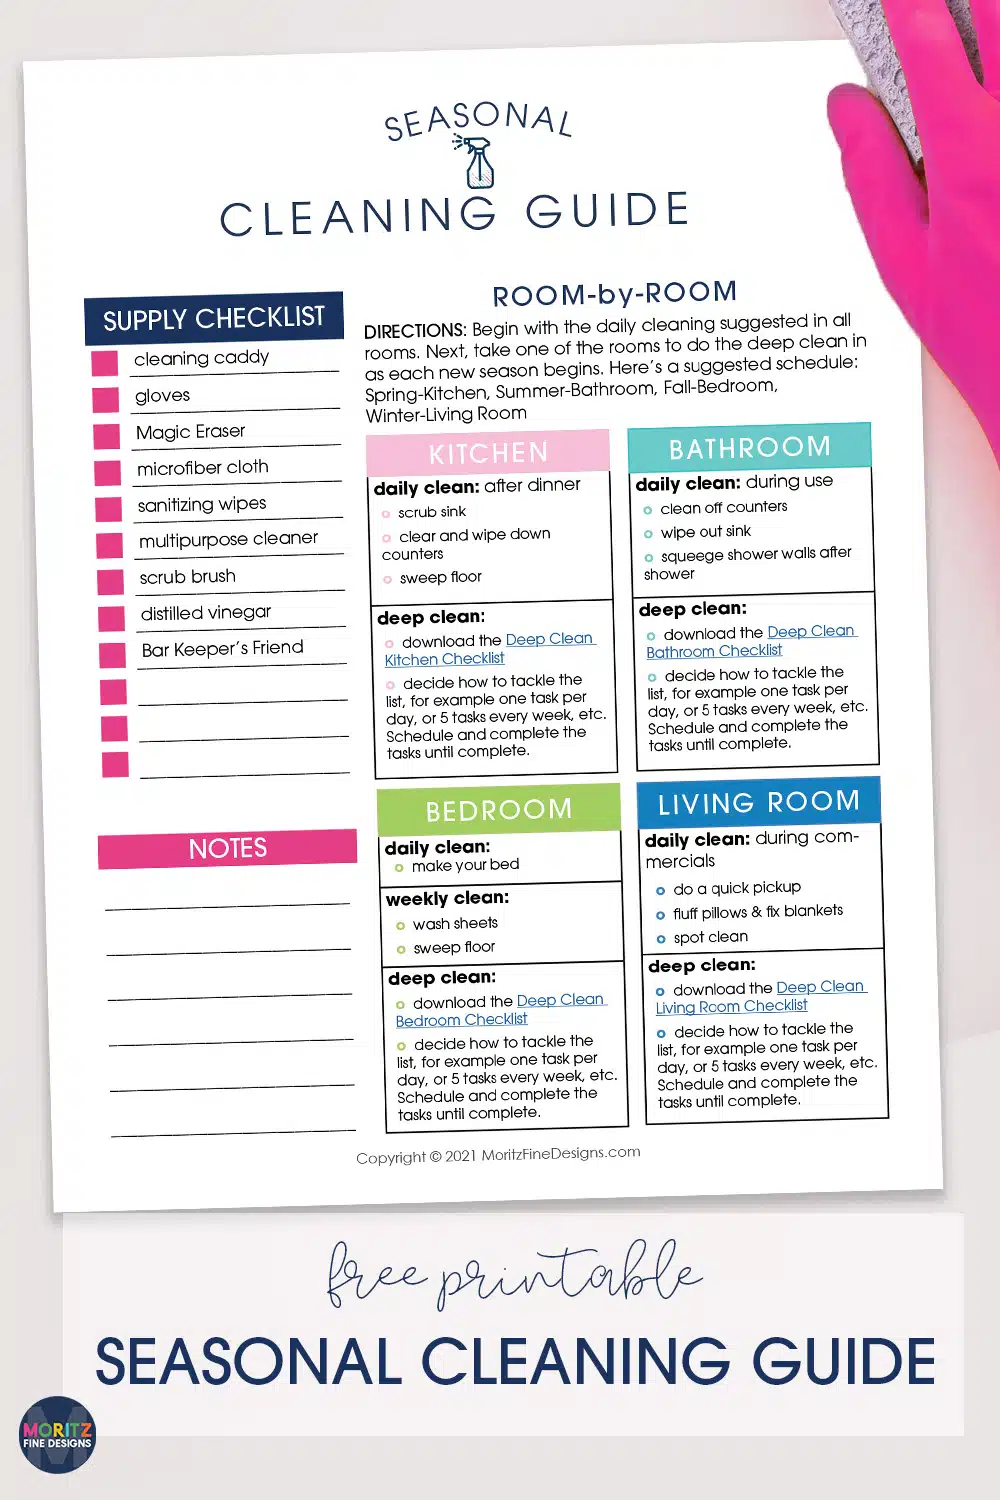 Free printable Seasonal Cleaning Guide for any season—spring, summer, fall, winter—to tackle everything from daily cleaning to a deep clean.